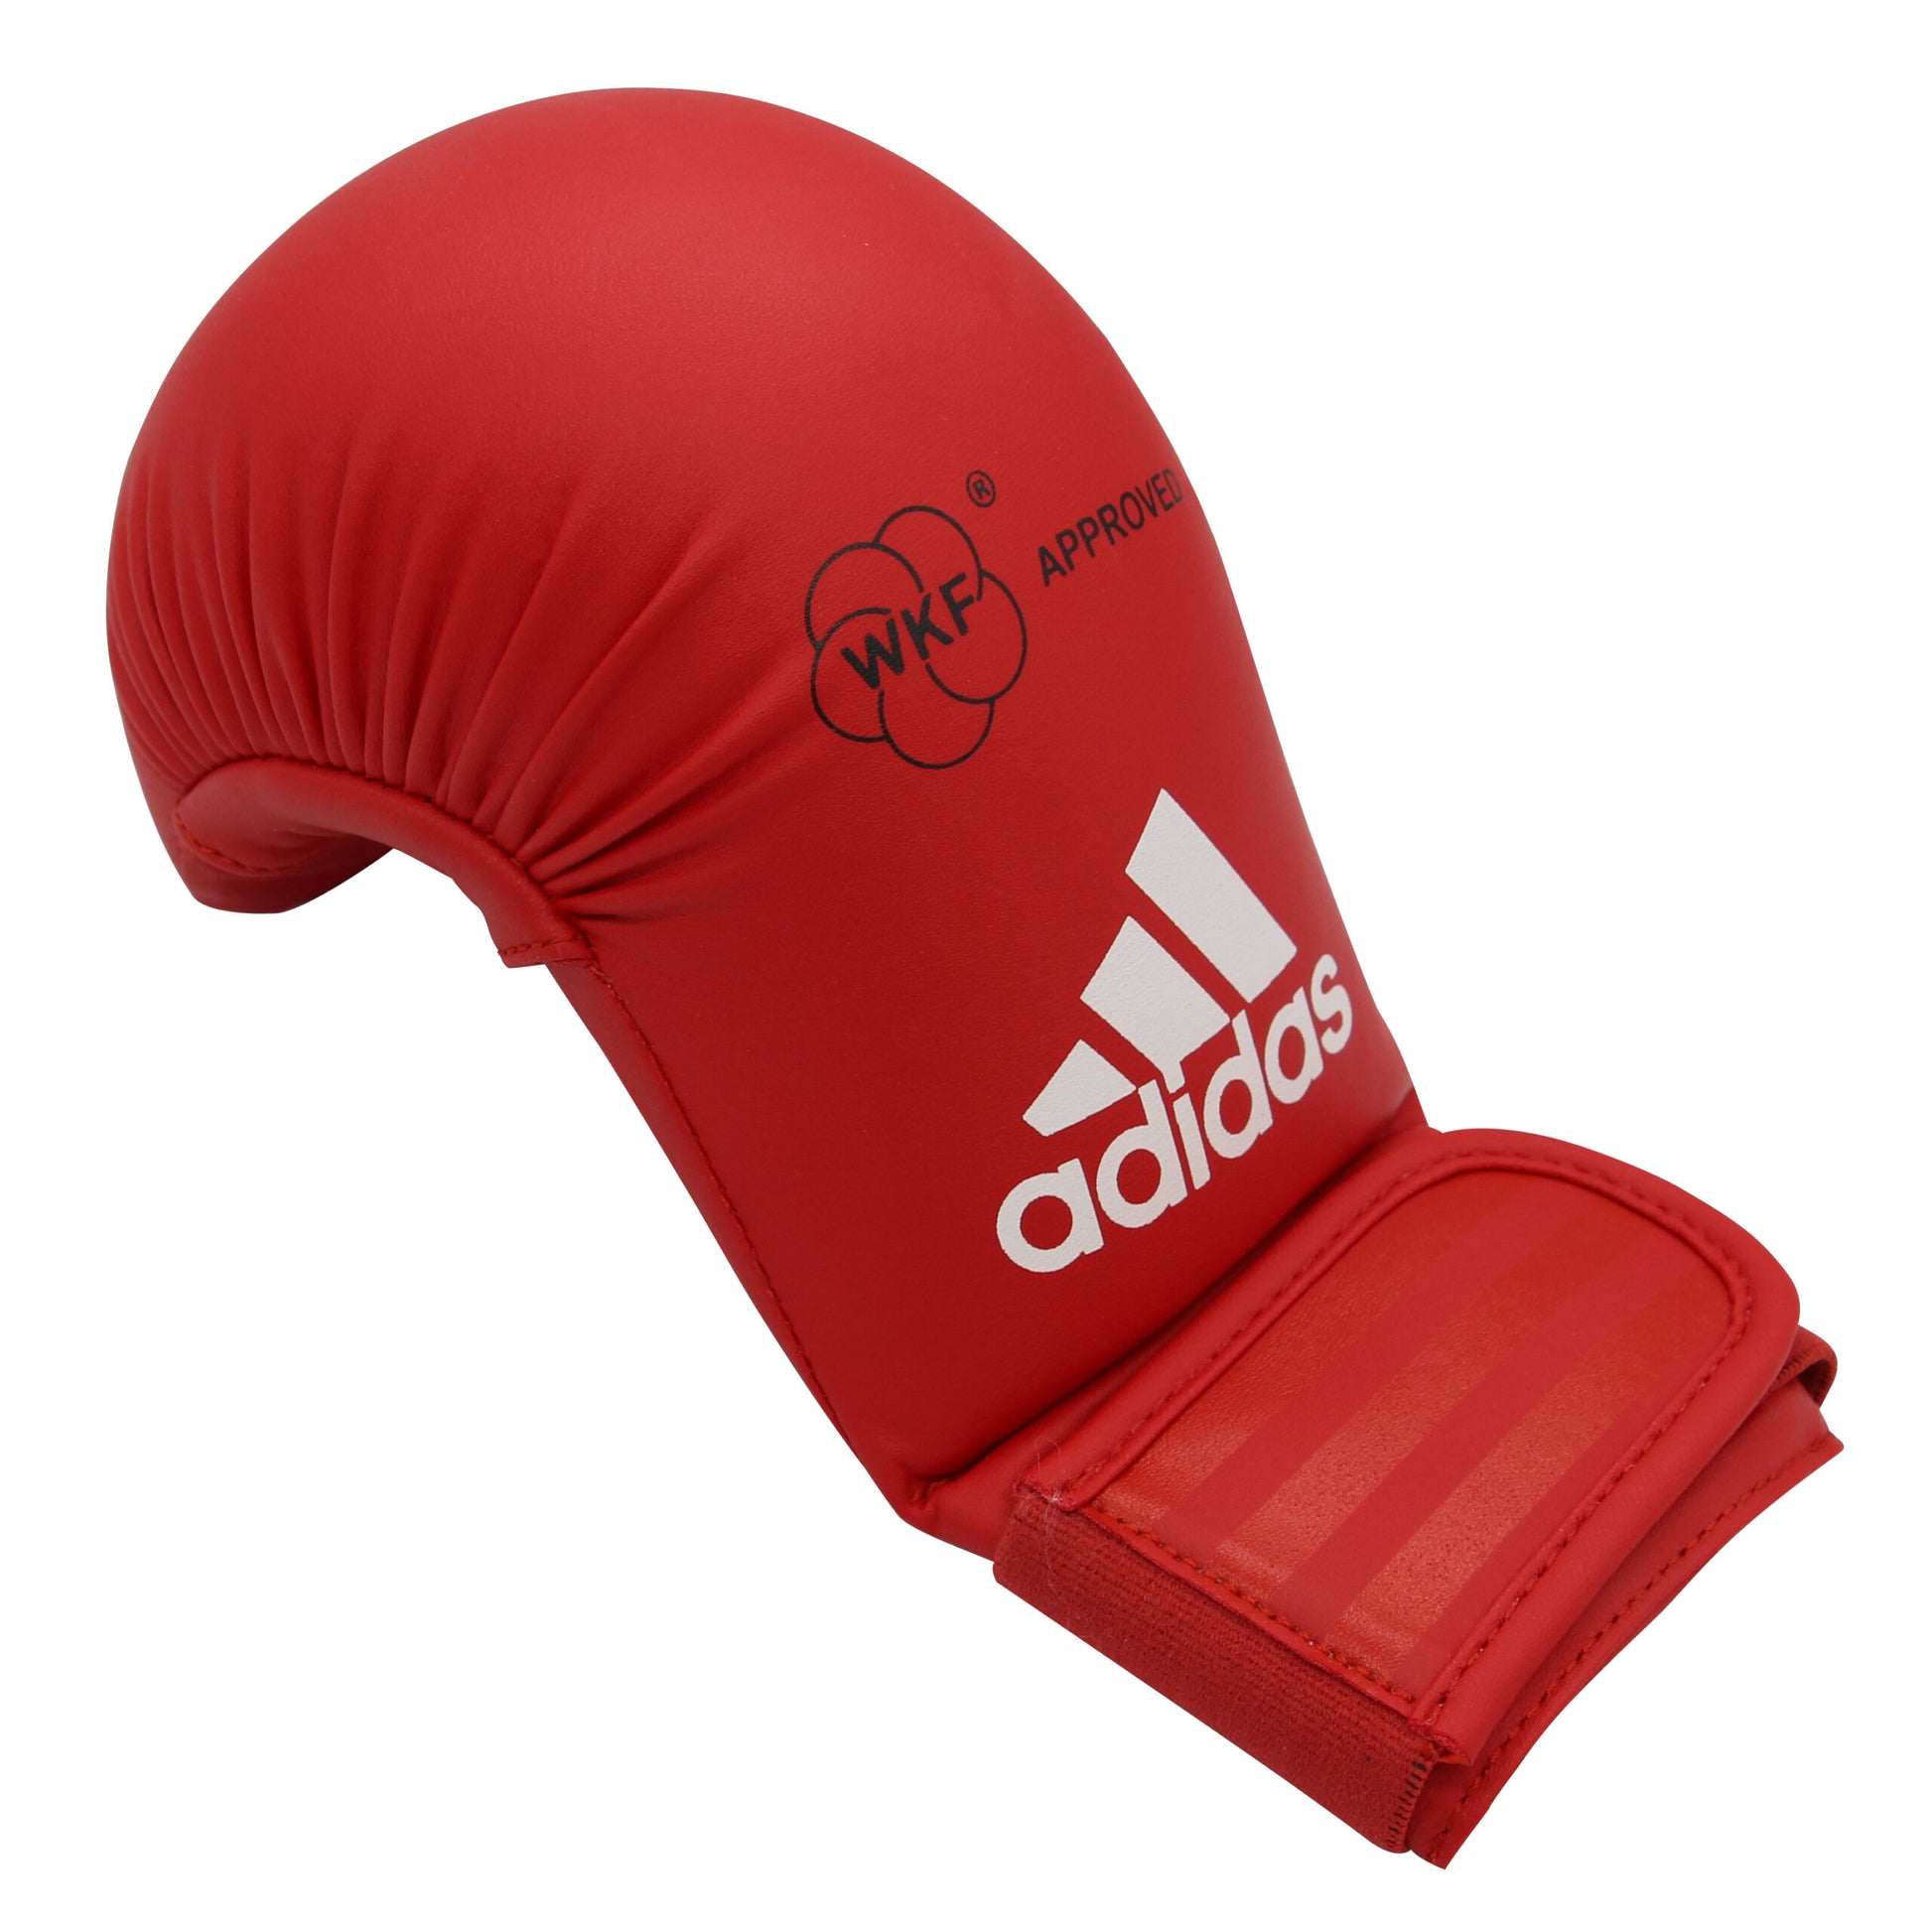 Adidas Wkf Approved Karate Mitts Red 03